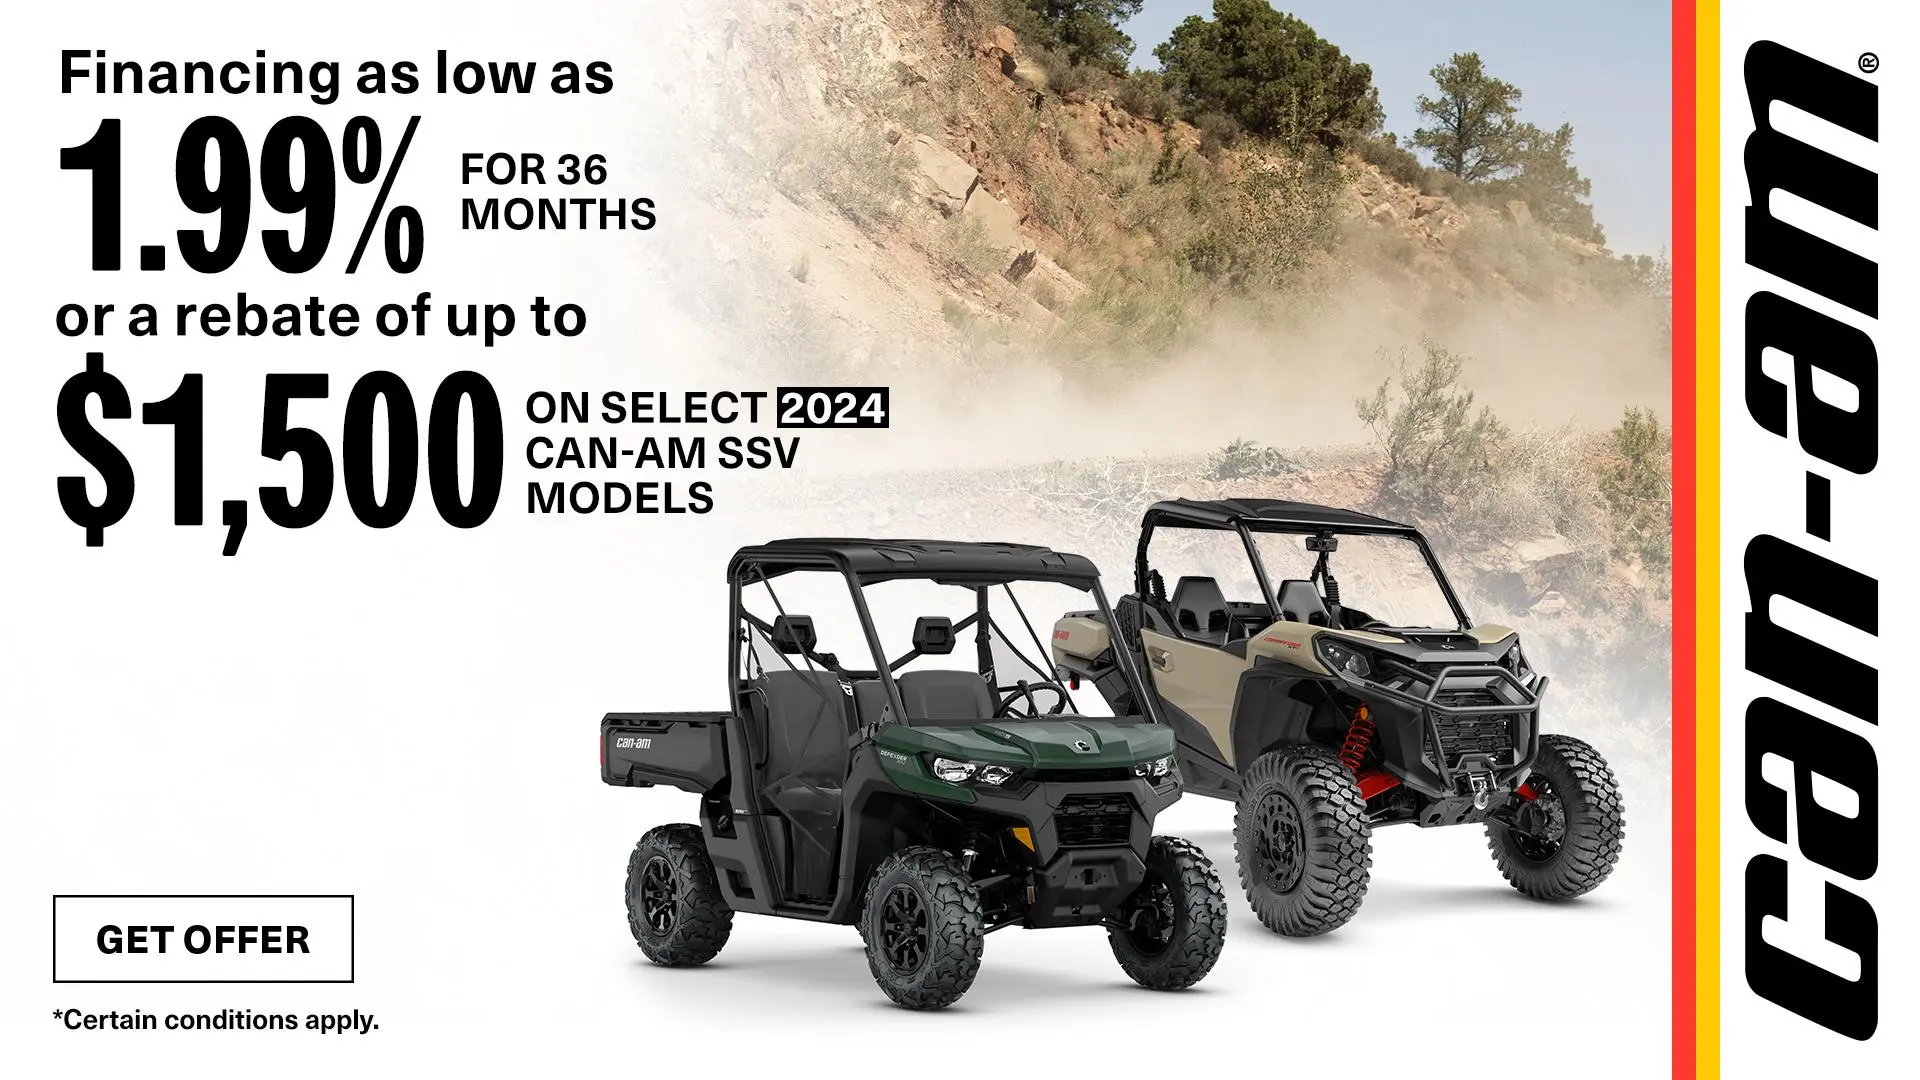 Financing as low as 0.99% for 36-months or up to $3,000 rebate on select 2023 Can-Am SSV models